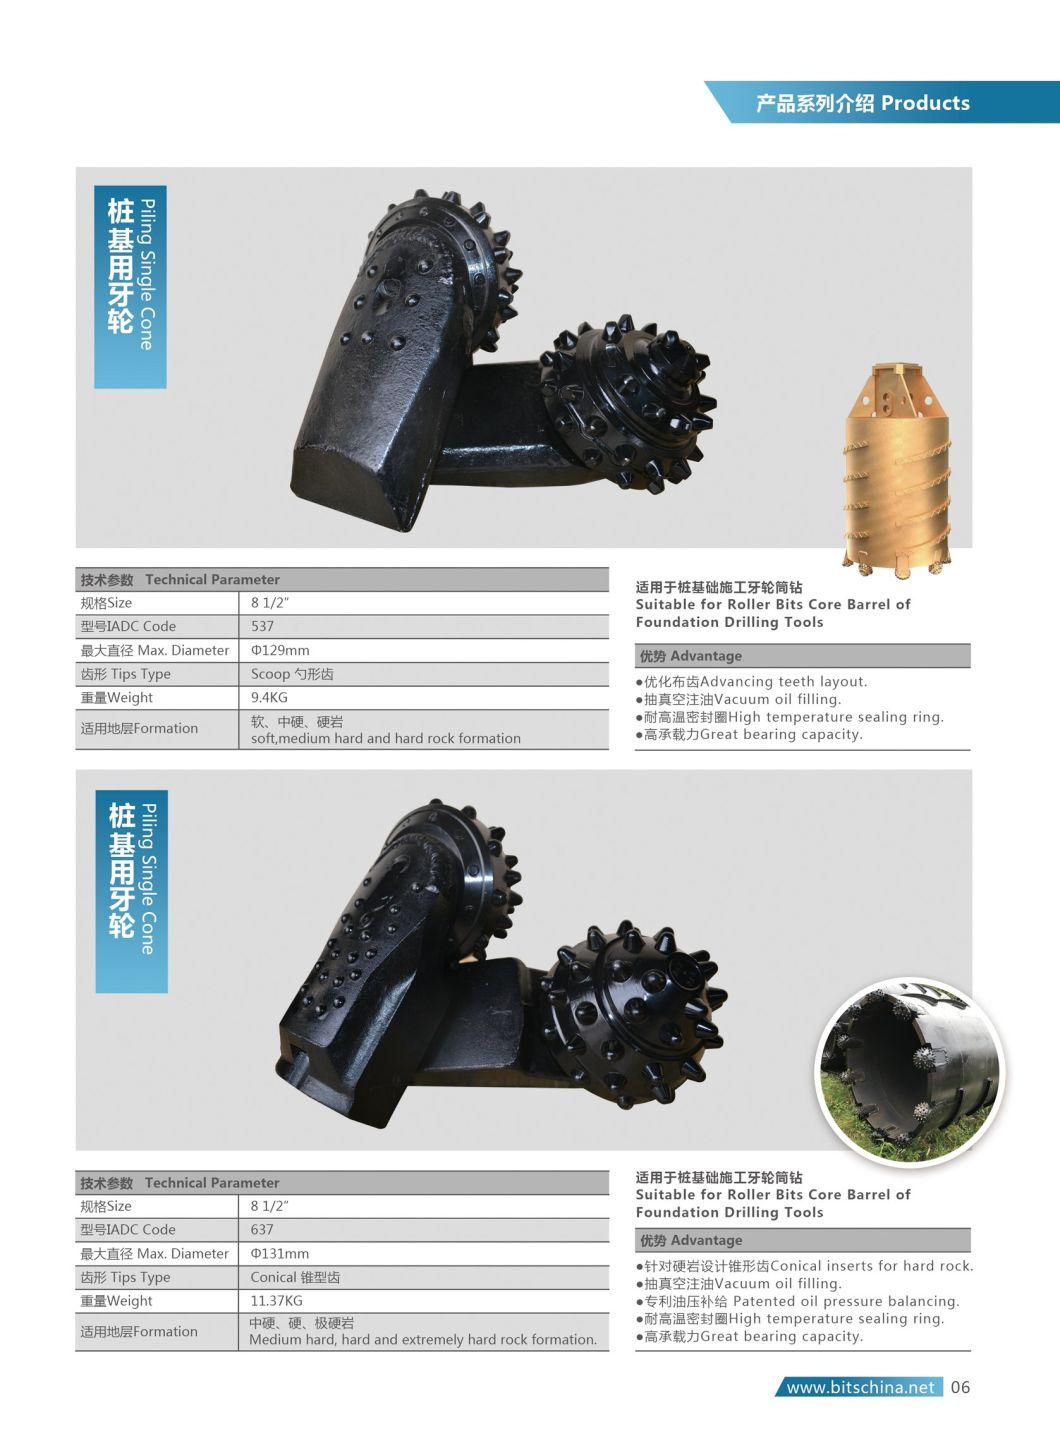 Yh-S50-637 8 1/2" Conical /Spherical Inserts Single Roller Cutter/Piling Single Roller Cone